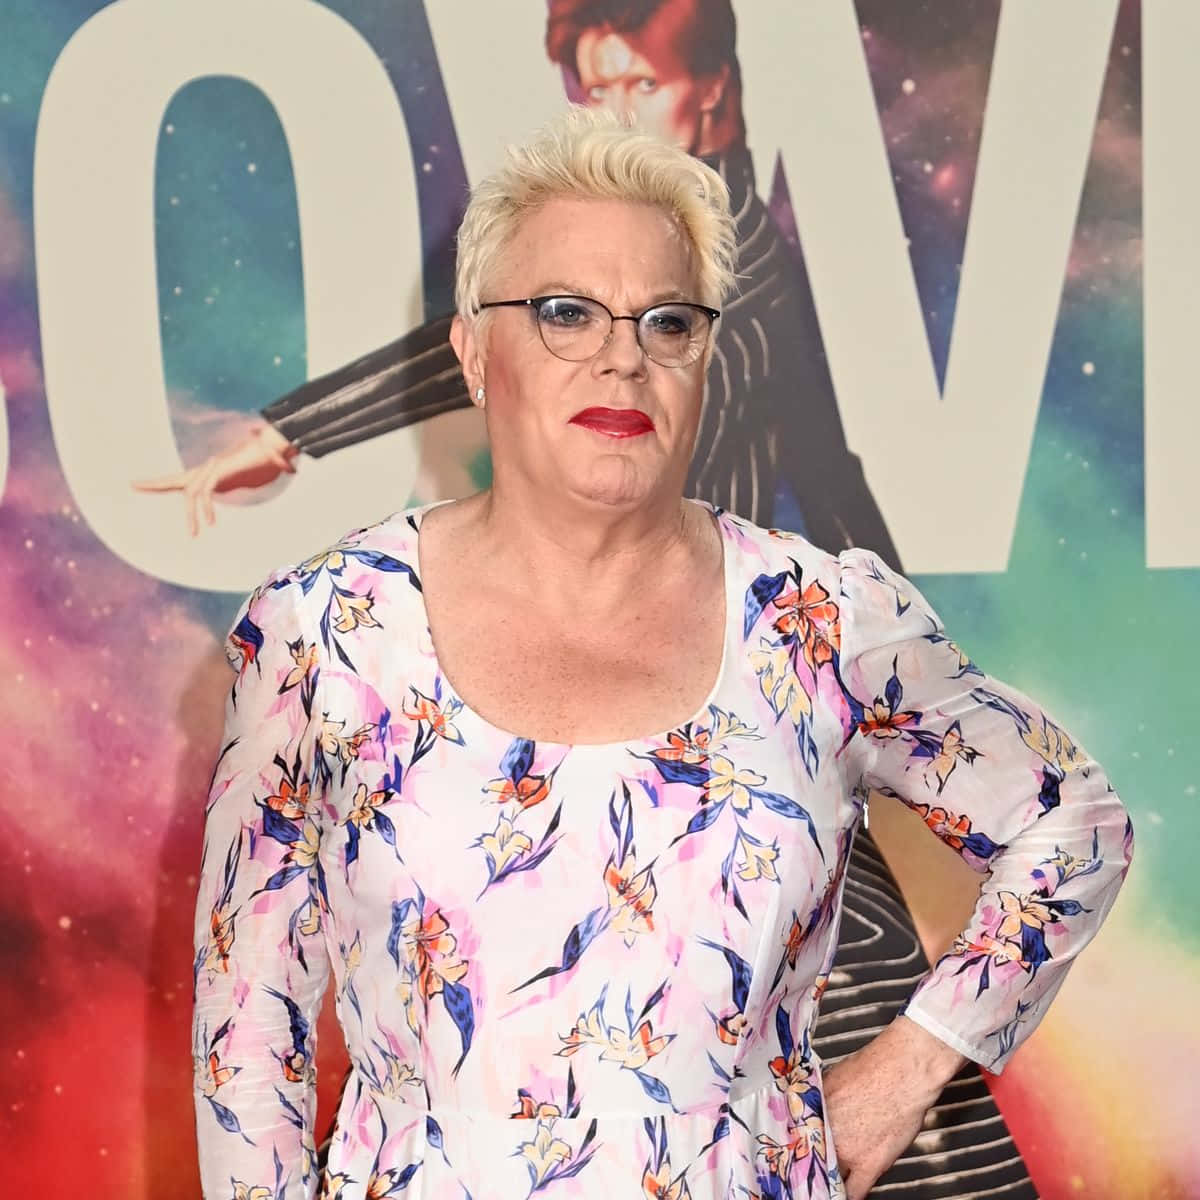 Eddie Izzard performing on stage in a vibrant outfit Wallpaper